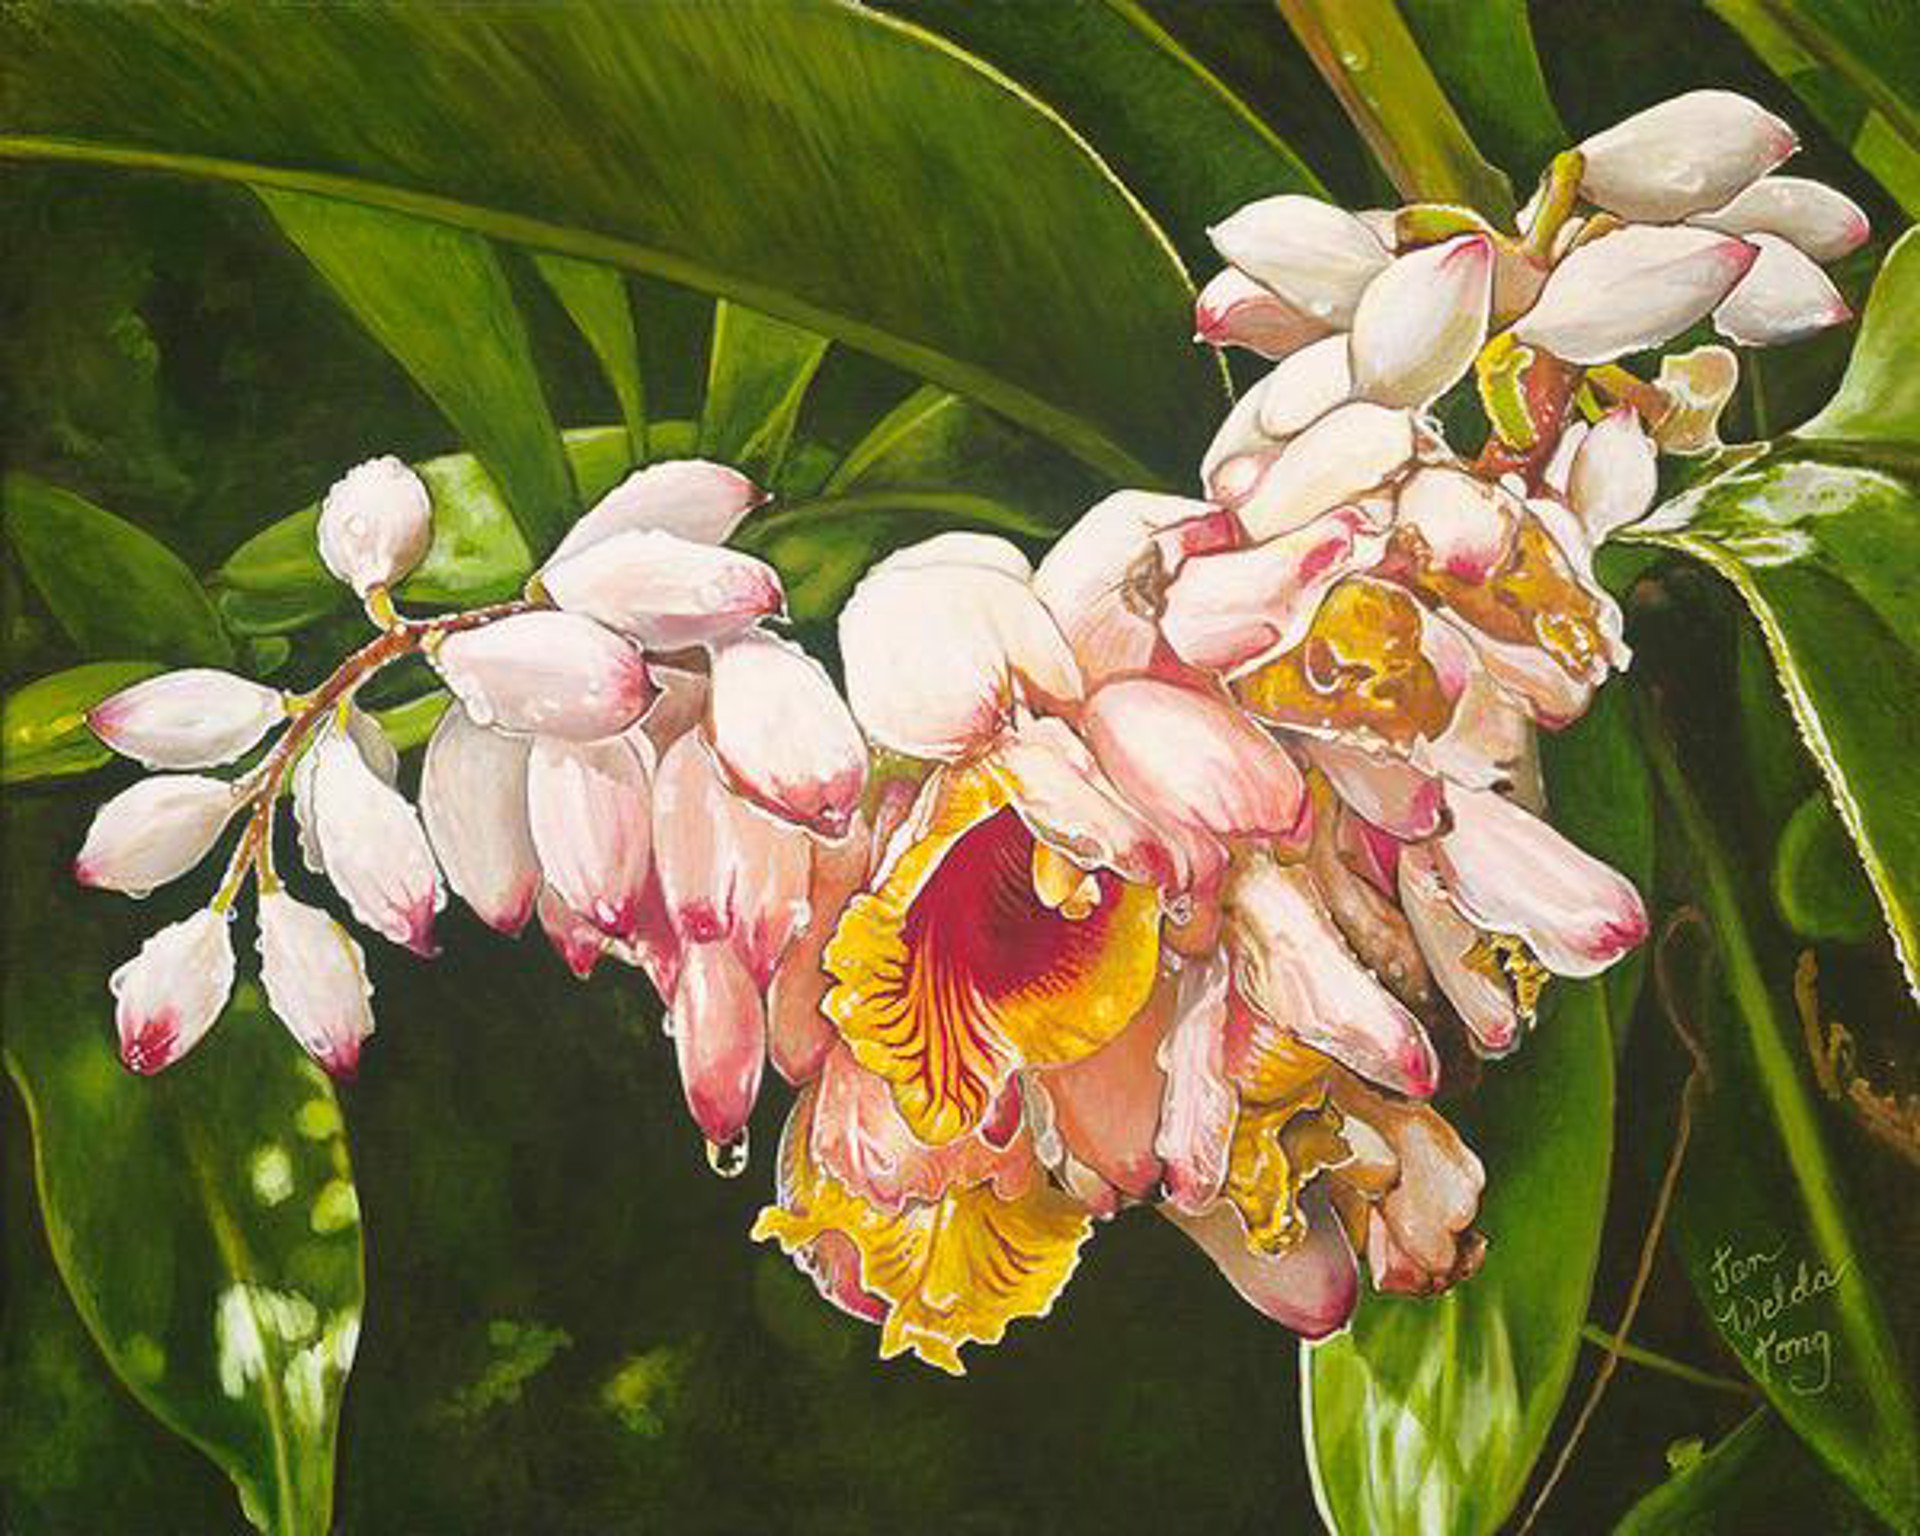 Shell Ginger Blossoms in the Rain by Jan Welda Tong